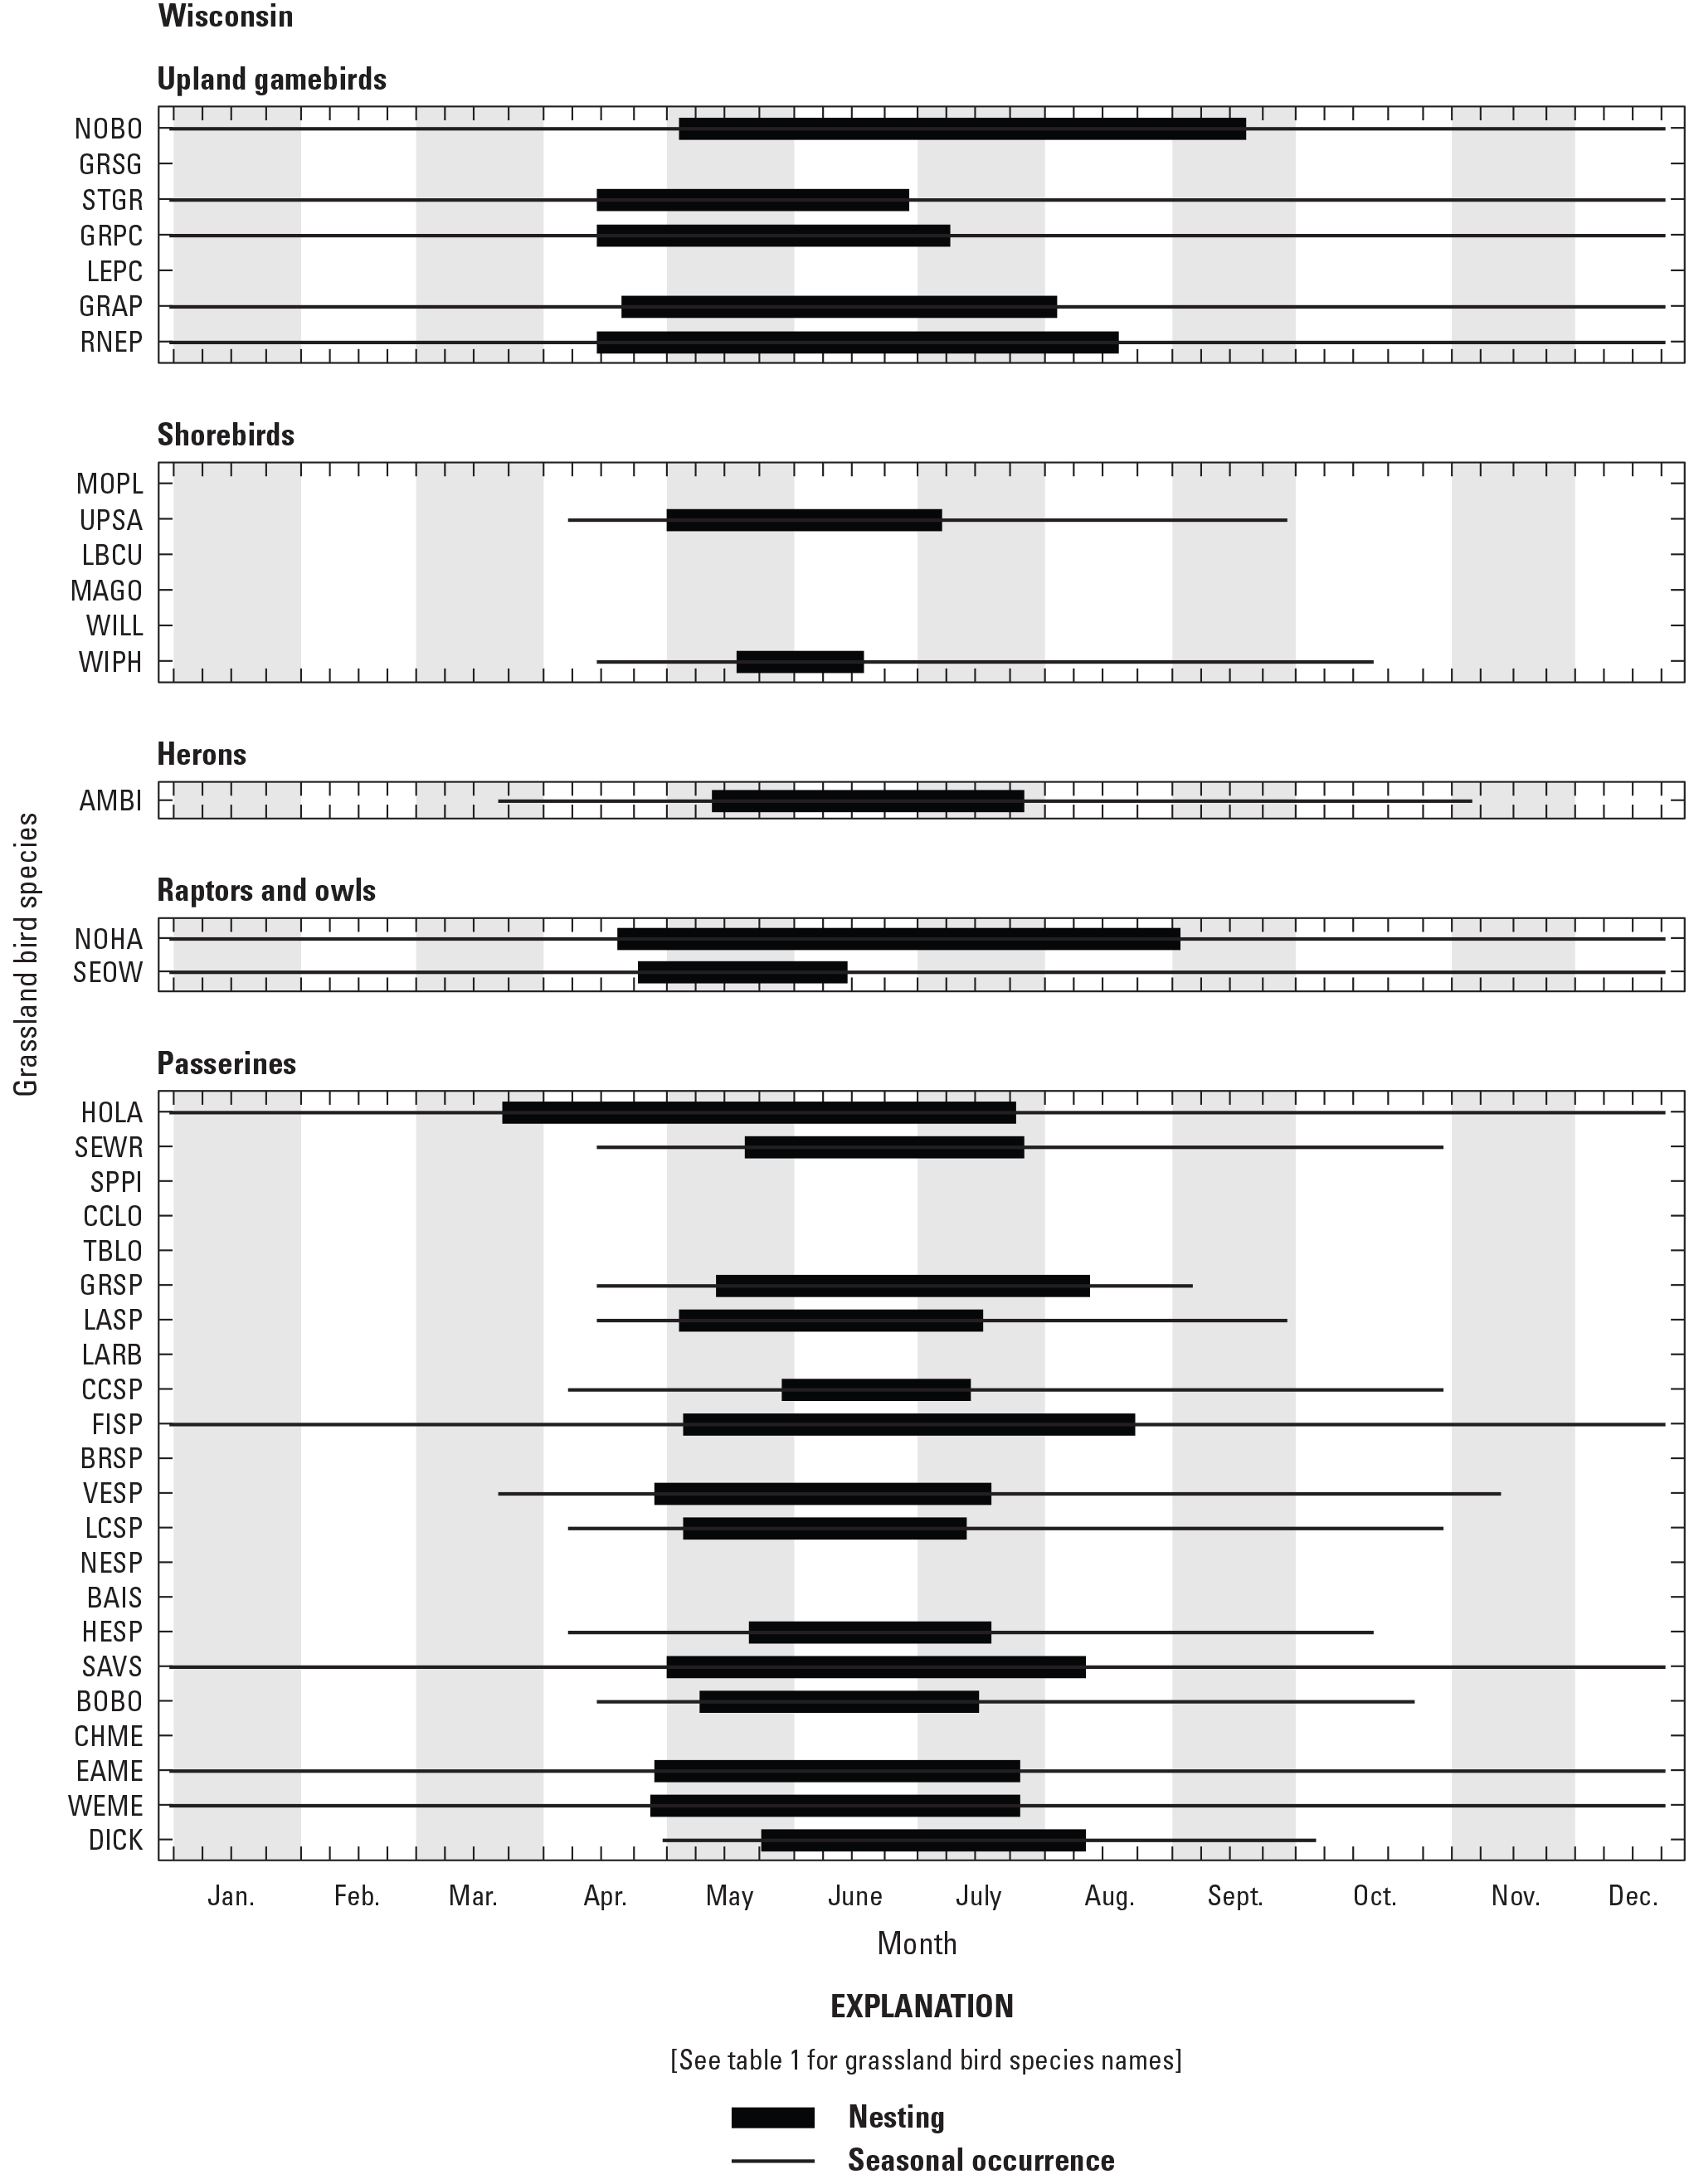 Figure showing seasonal occurrence and nesting phenology for 38 grassland bird species
               in Wisconsin, United States.